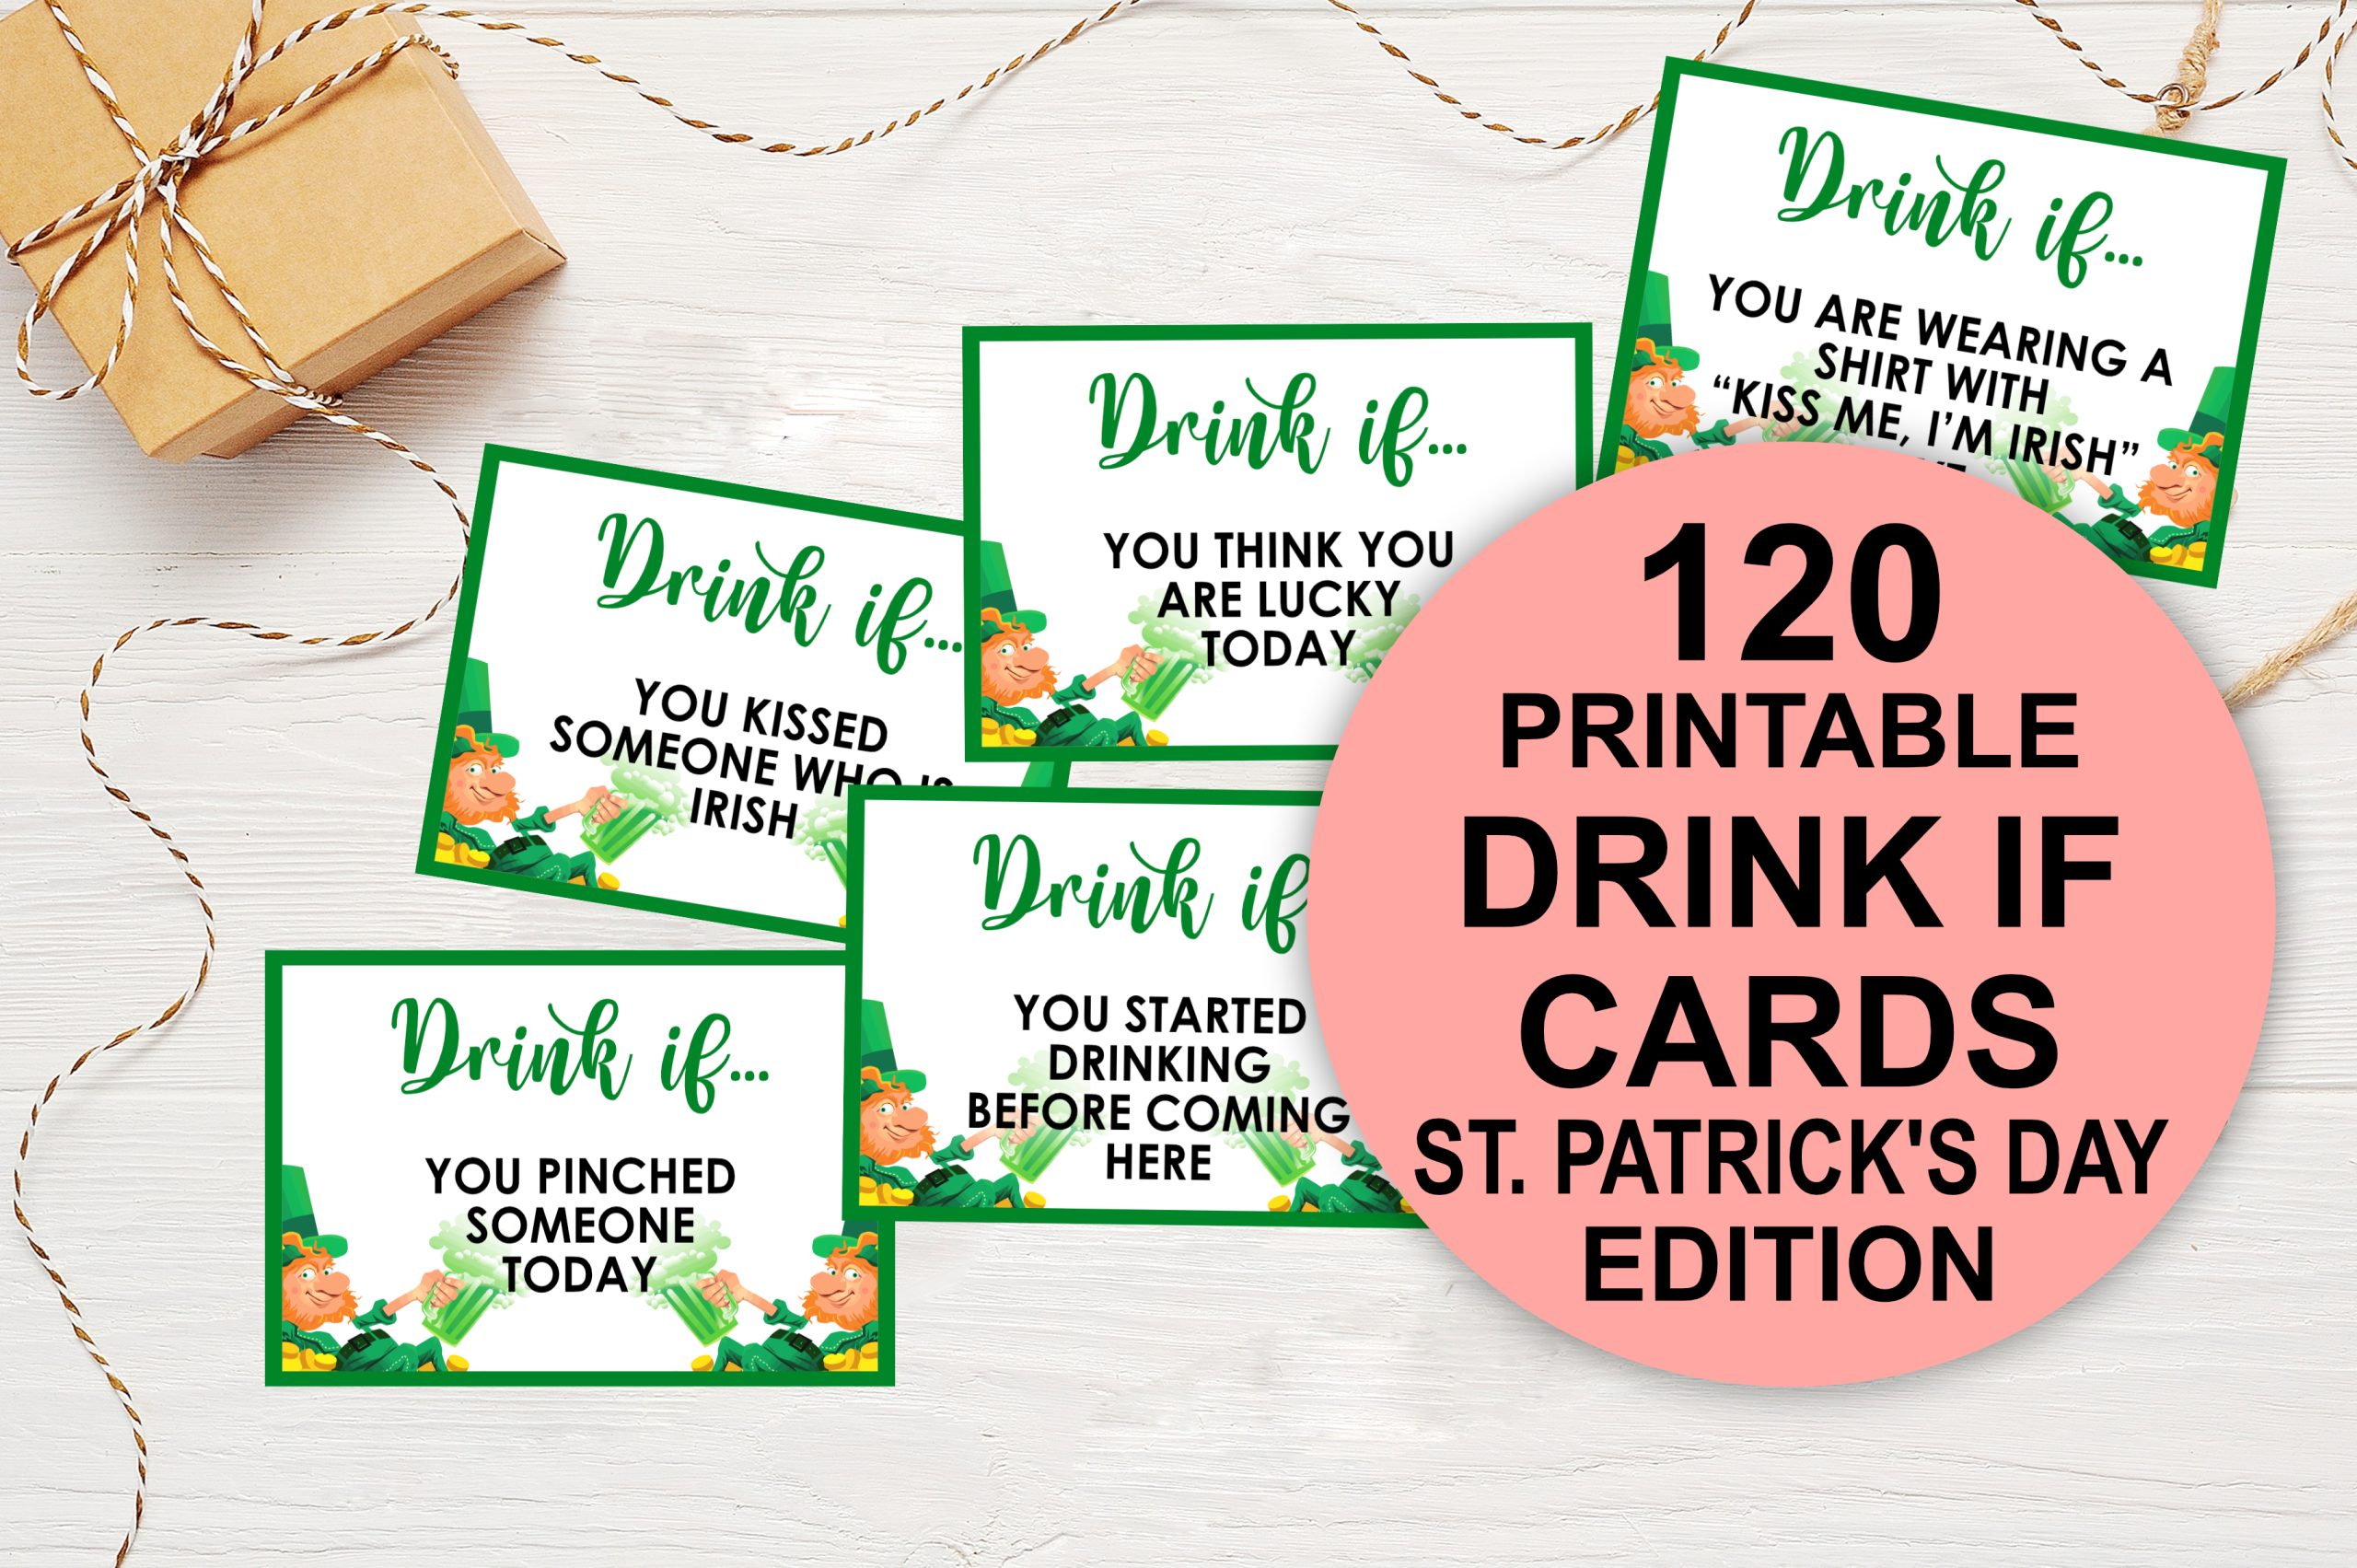 HOLIDAY Drink if St. Patrick’s Day Game, Shamrock’s Day Game , PRINTABLE, Fun St. Paddy’s Day Game 3.25x2.25" cards